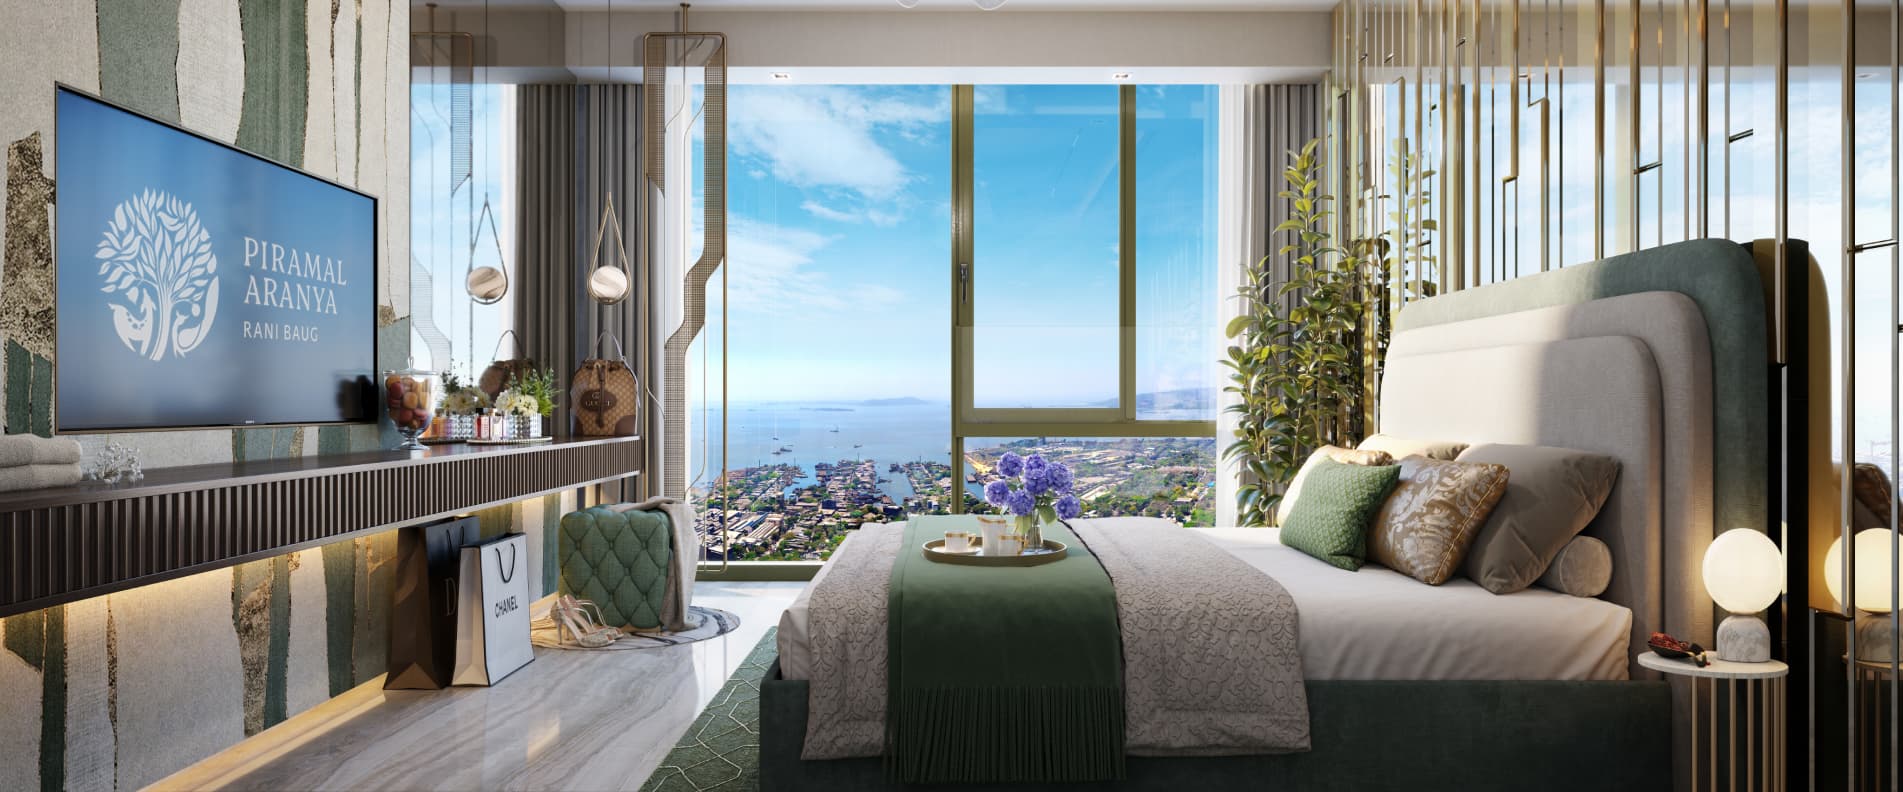 Piramal Aranya's Ahan Tower: Experience timeless elegance in the master bedroom view of our 2 and 3 BHK flats.